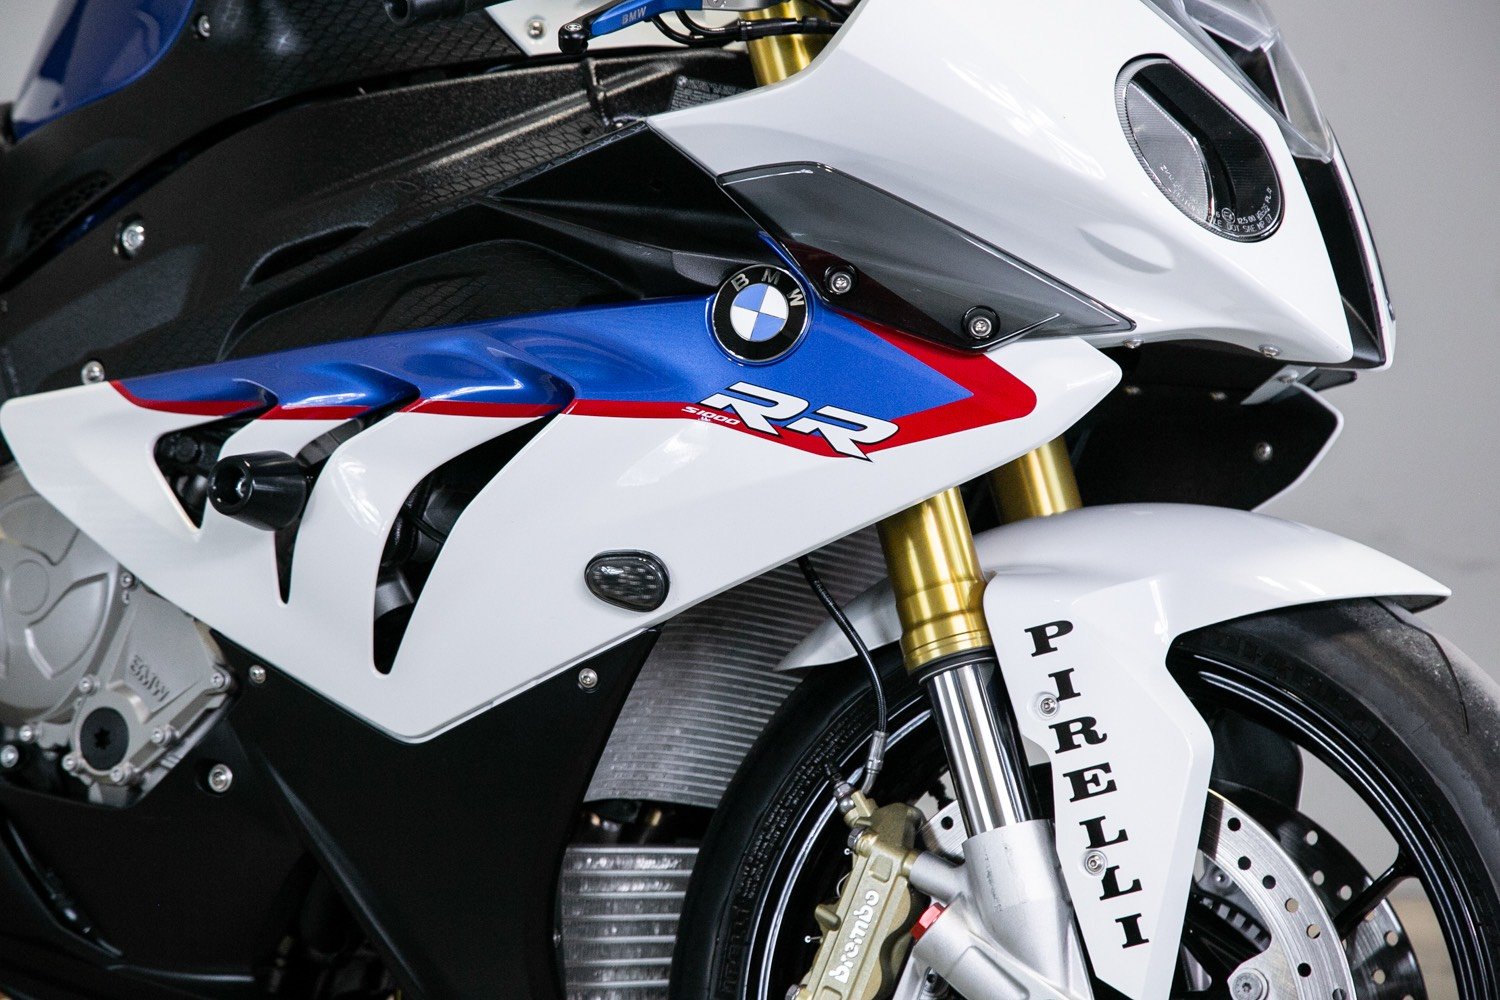 Used 2013 BMW S 1000 RR | Motorcycles in Sacramento CA ...